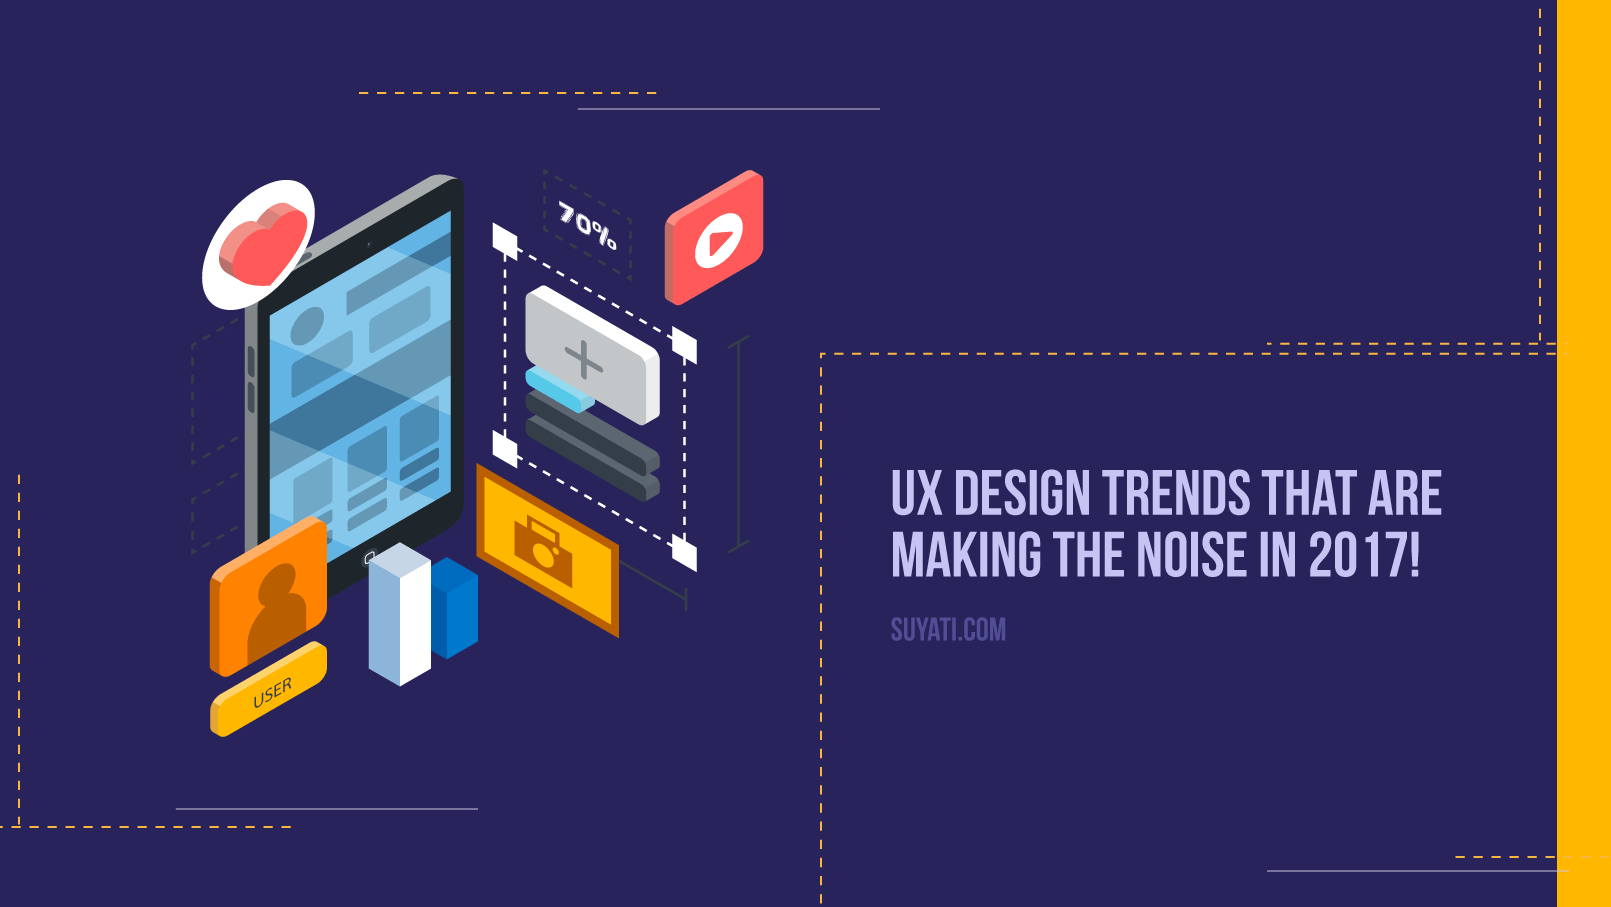 UX design trends that are making the noise in 2017!